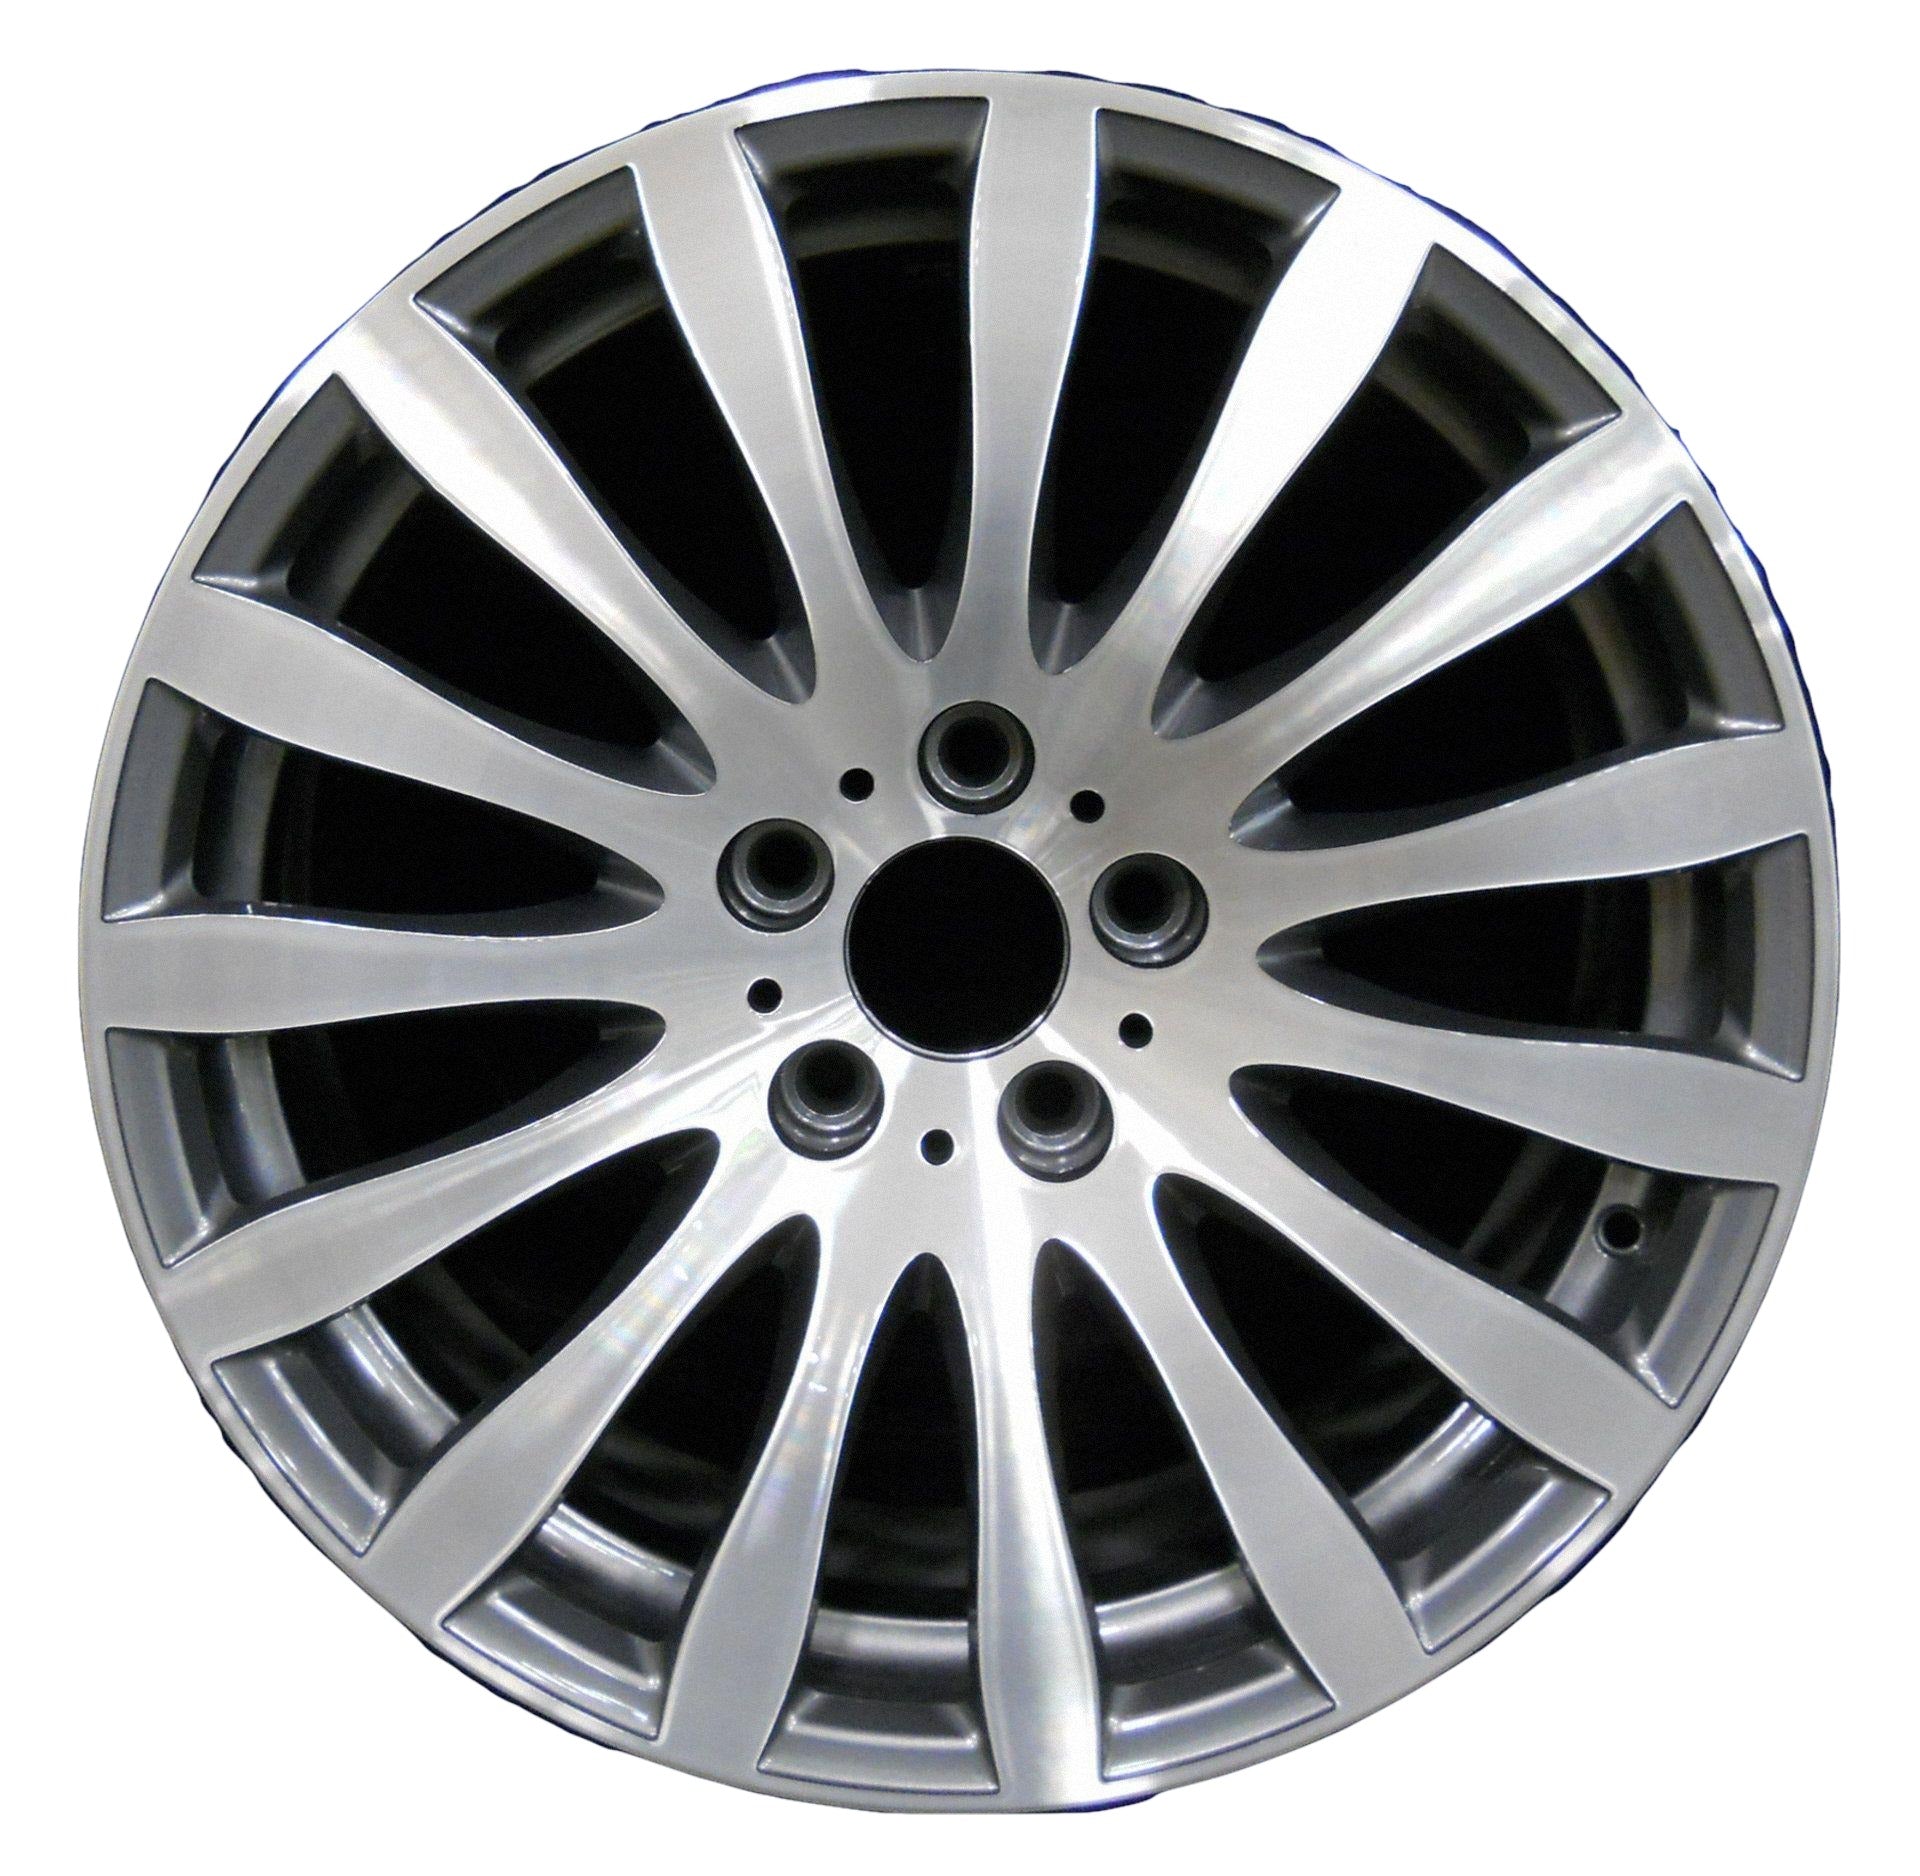 BMW 323i  2006, 2007, 2008, 2009, 2010, 2011, 2012 Factory OEM Car Wheel Size 19x8 Alloy WAO.59626FT.LC37.MABRT